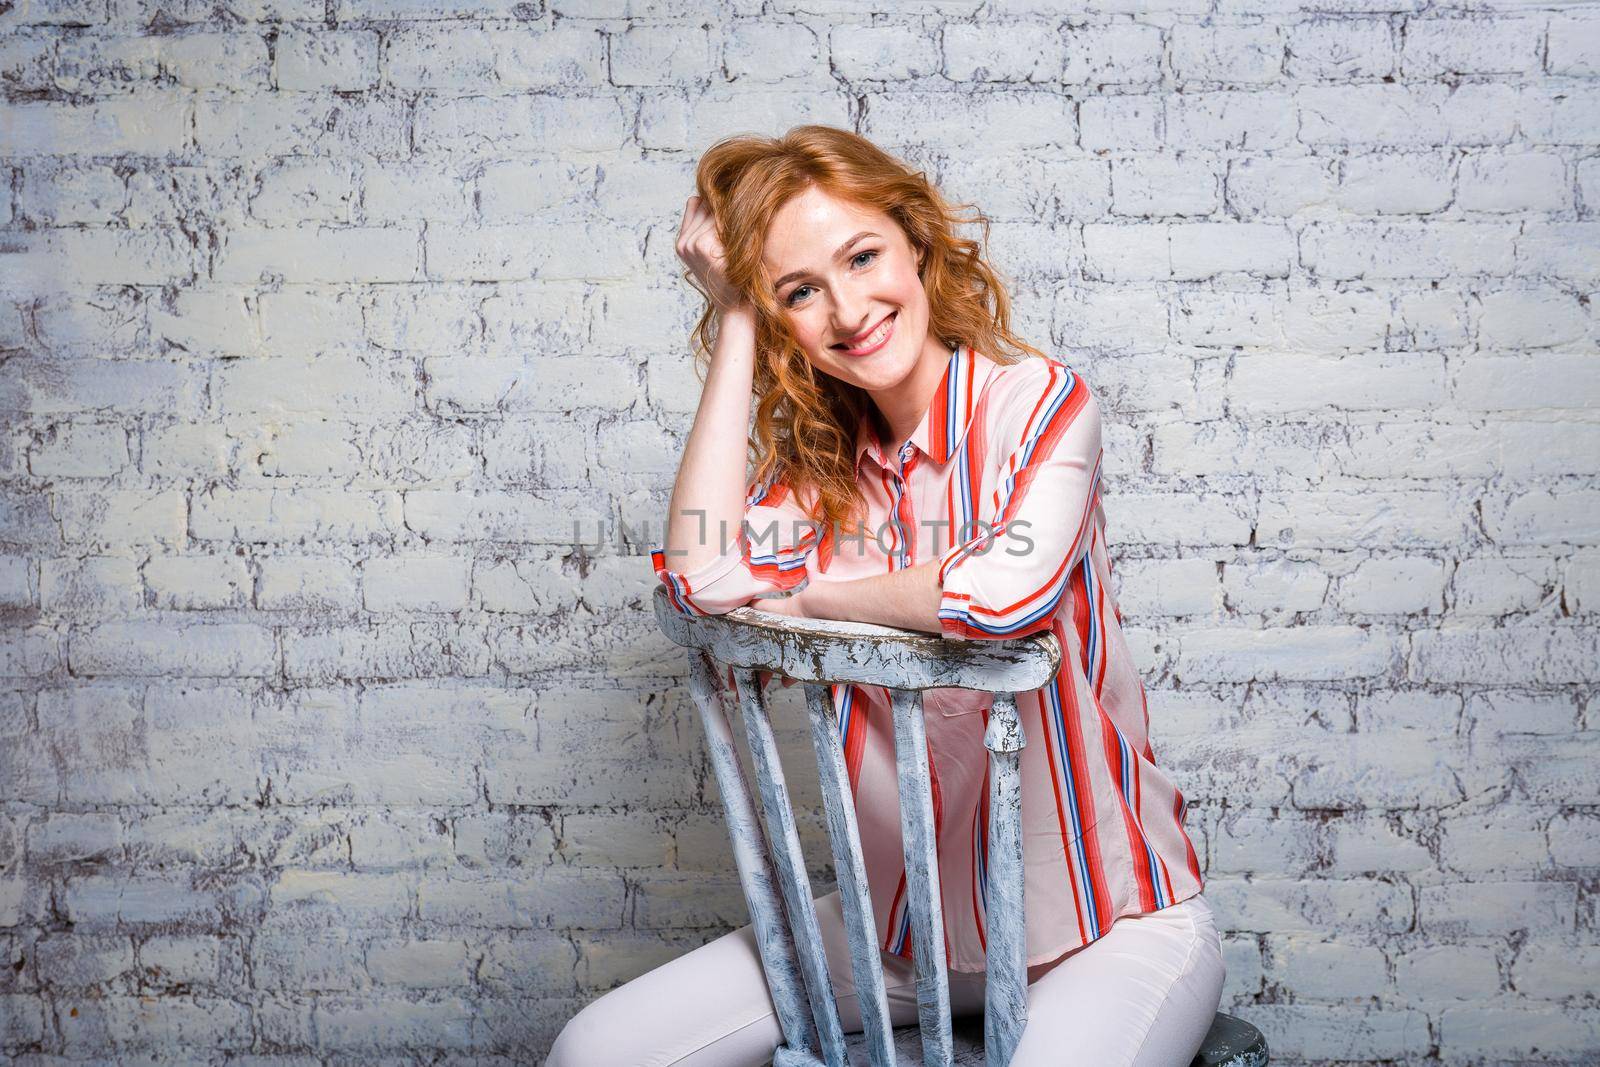 close-up portrait Beautiful young female student with red curly hair and freckles on her face sitting on a brick wall in gray background. Dressed in a red striped shirt. Hands touching the hair.